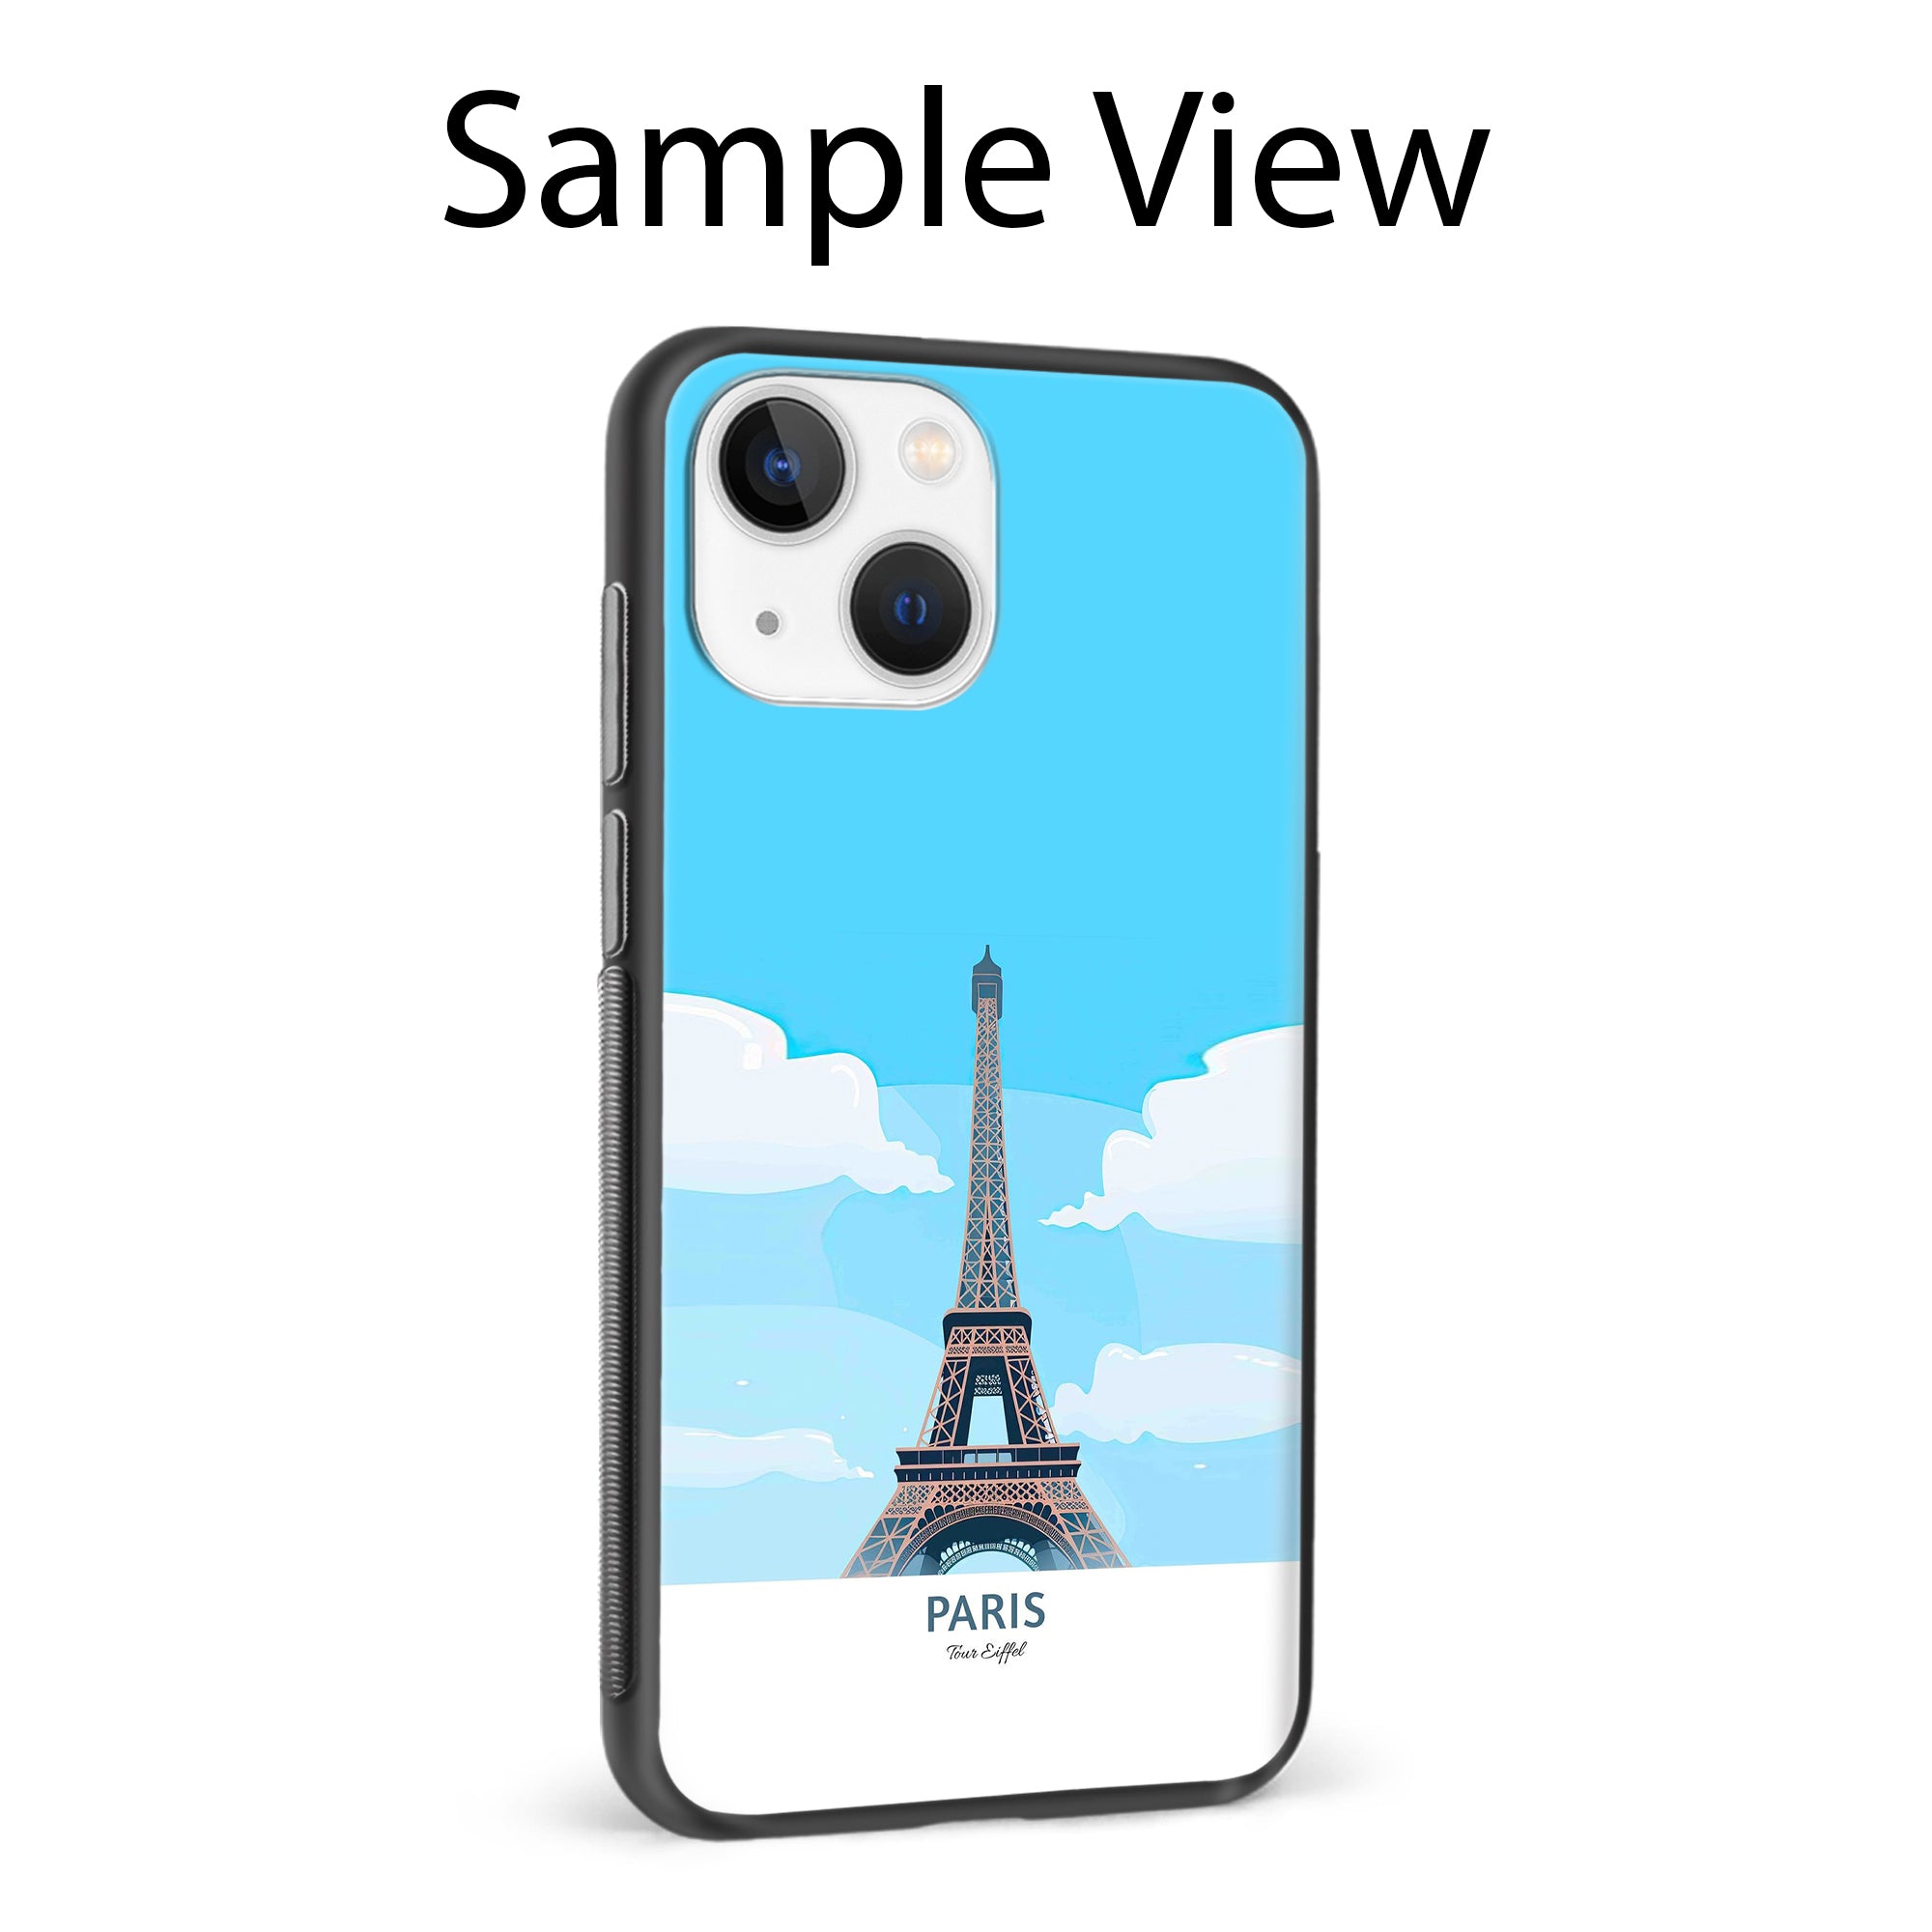 Buy Paris Metal-Silicon Back Mobile Phone Case/Cover For Samsung Galaxy A12 Online